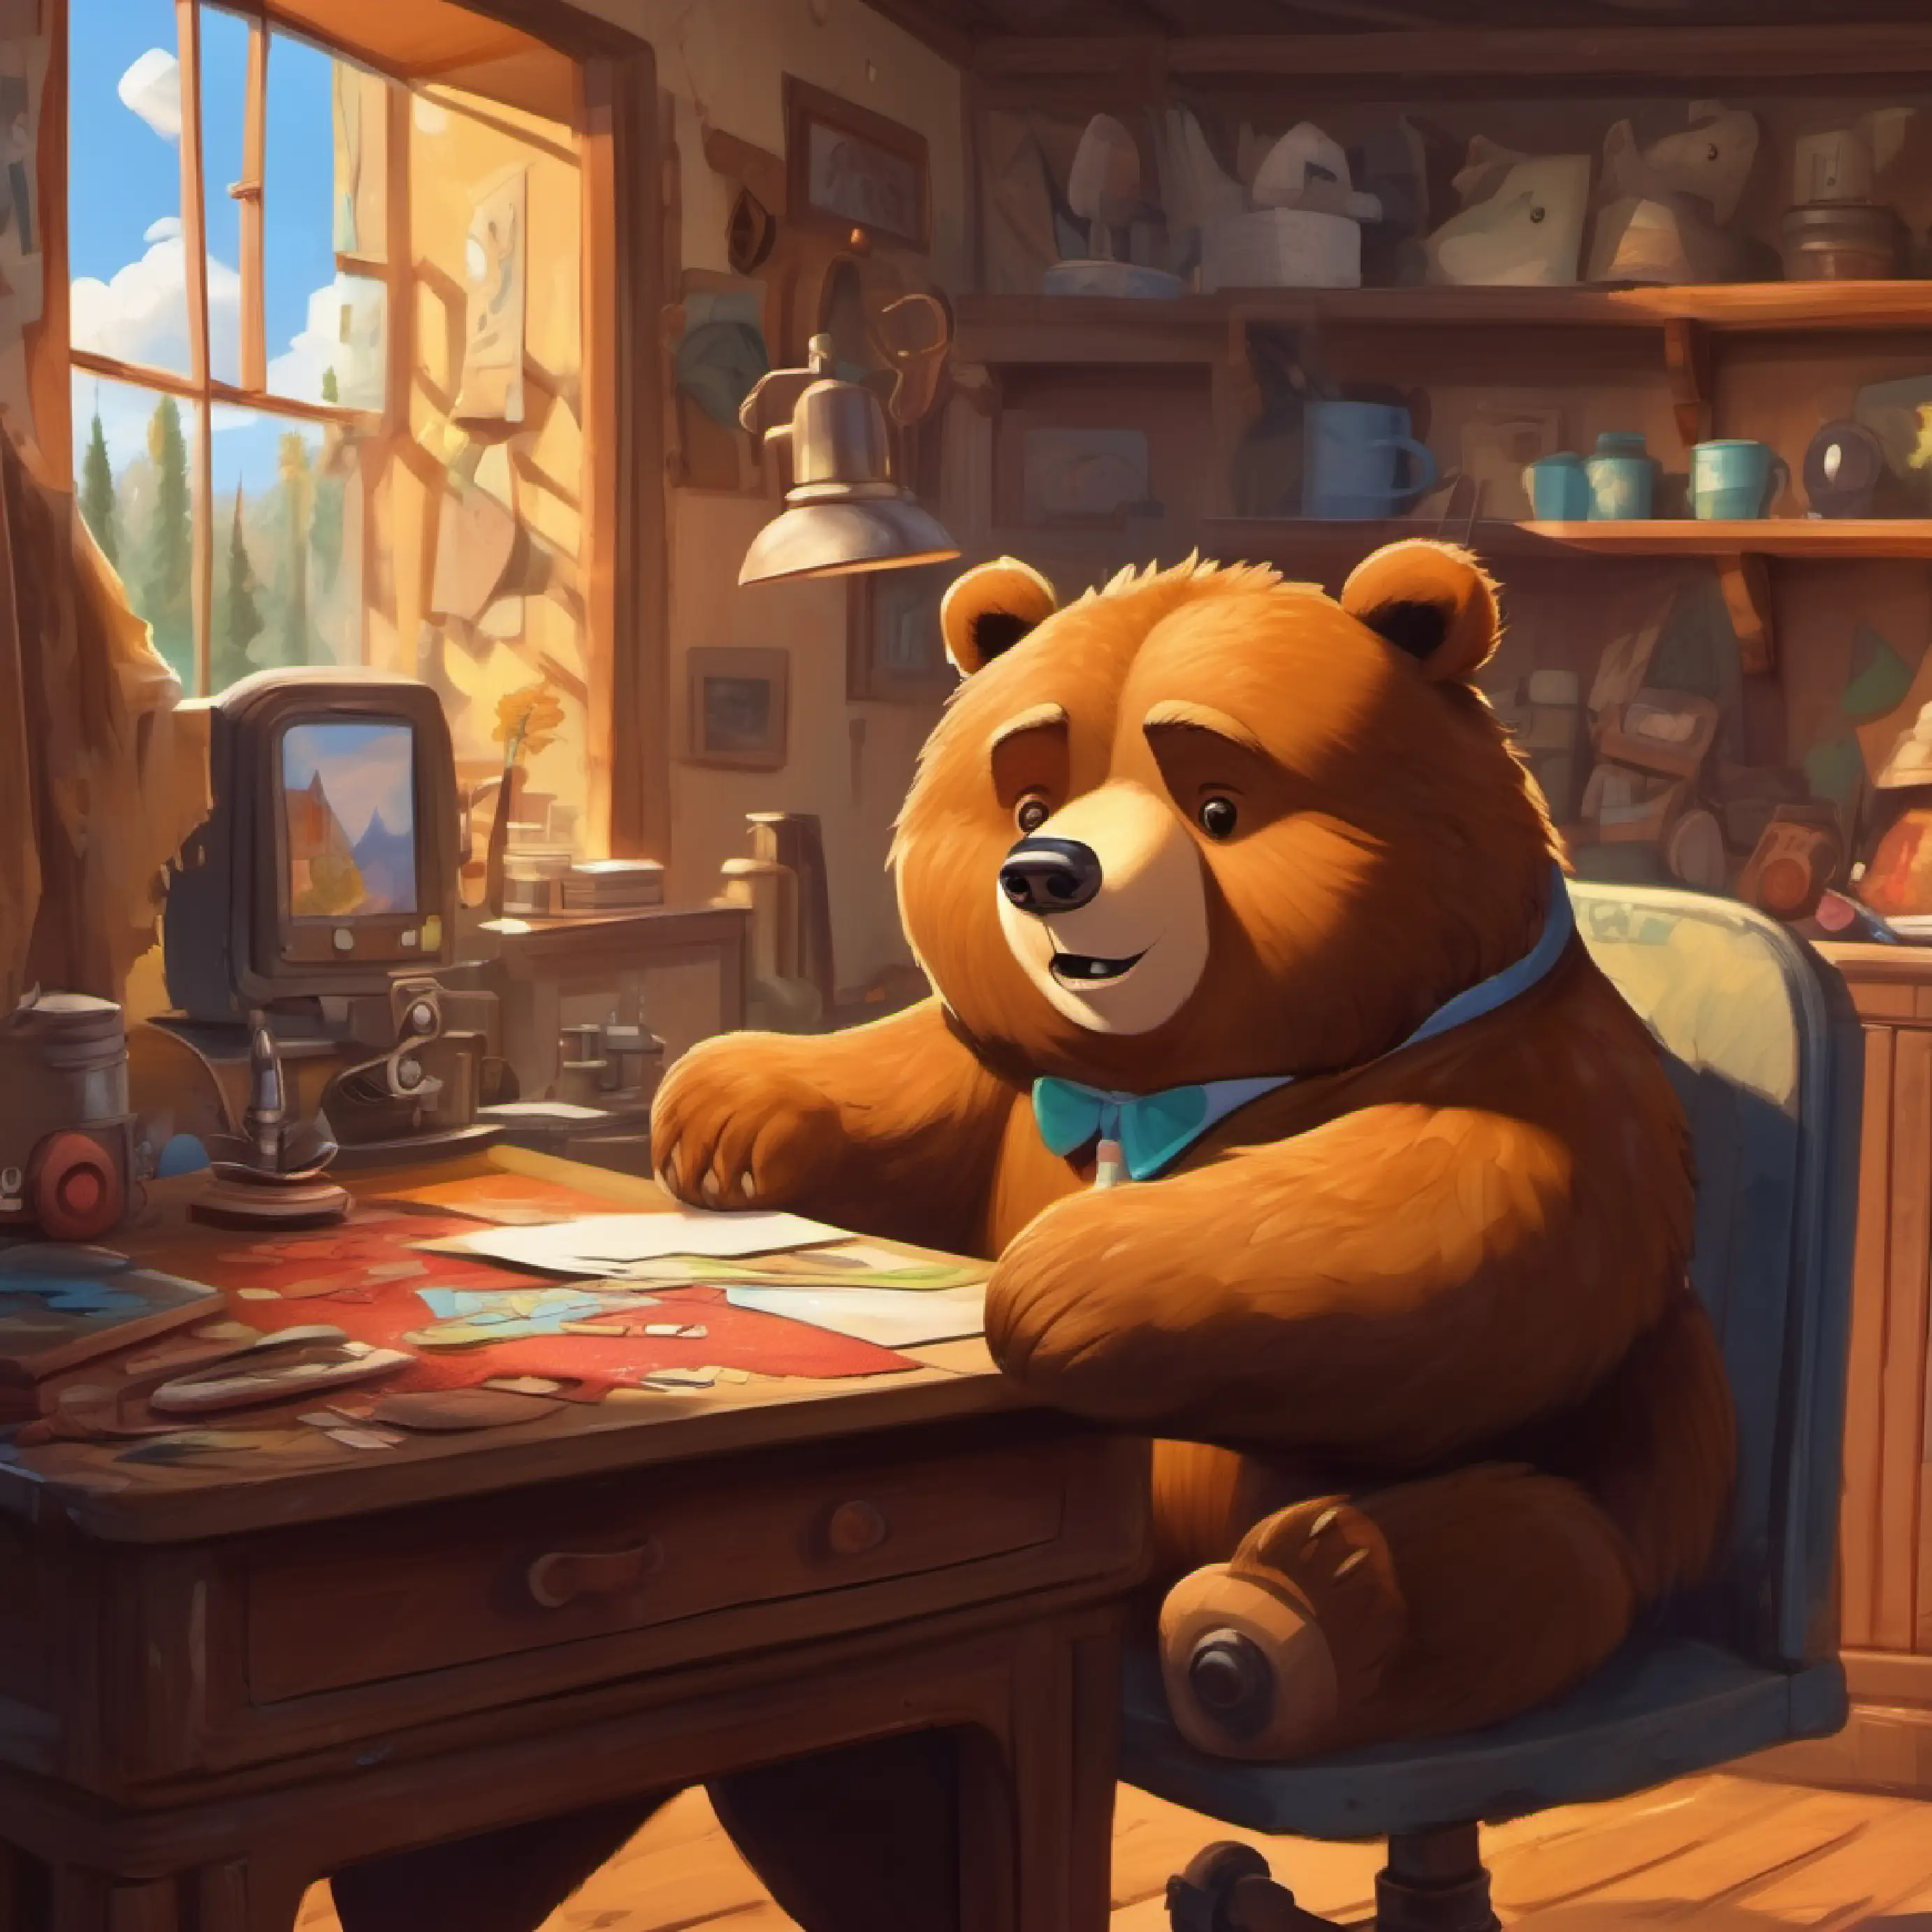 A big, friendly bear with soft brown fur and a puzzled look's suit is ruined, Timmy blames his scissors and sewing machine.